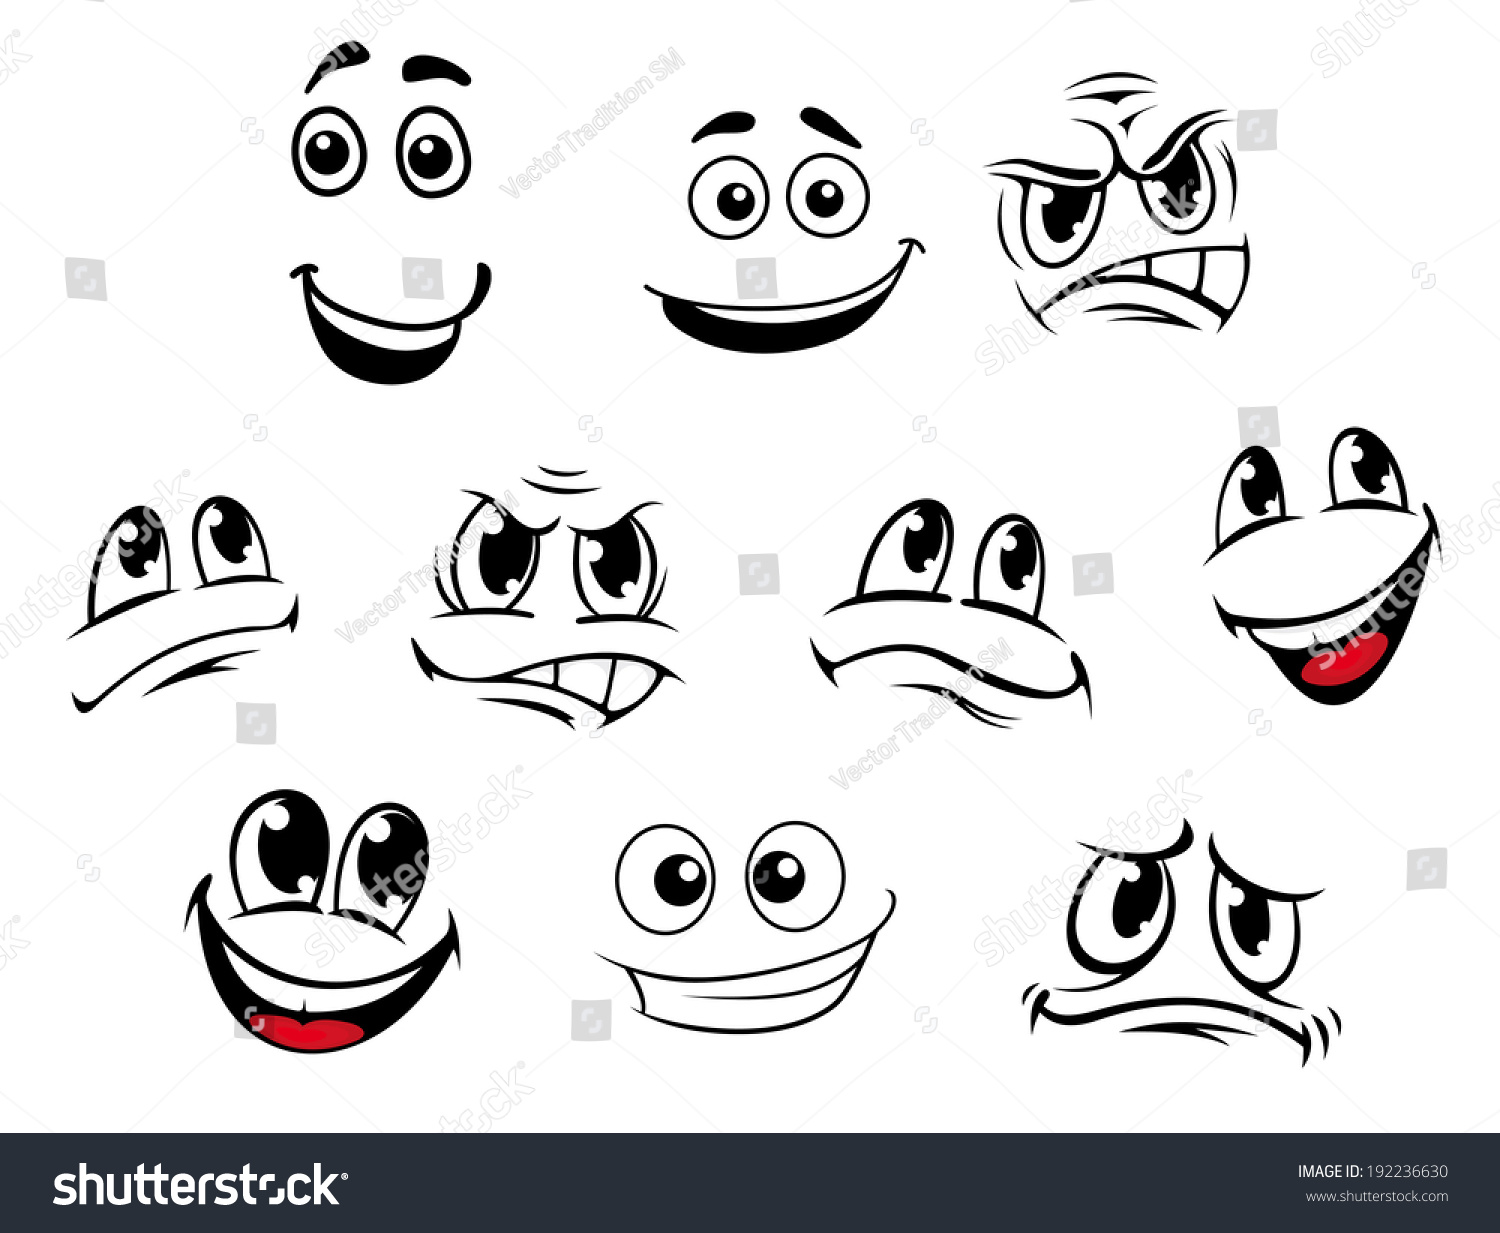 Cartoon faces set with different emotions for comics. Vector version also available in gallery #192236630